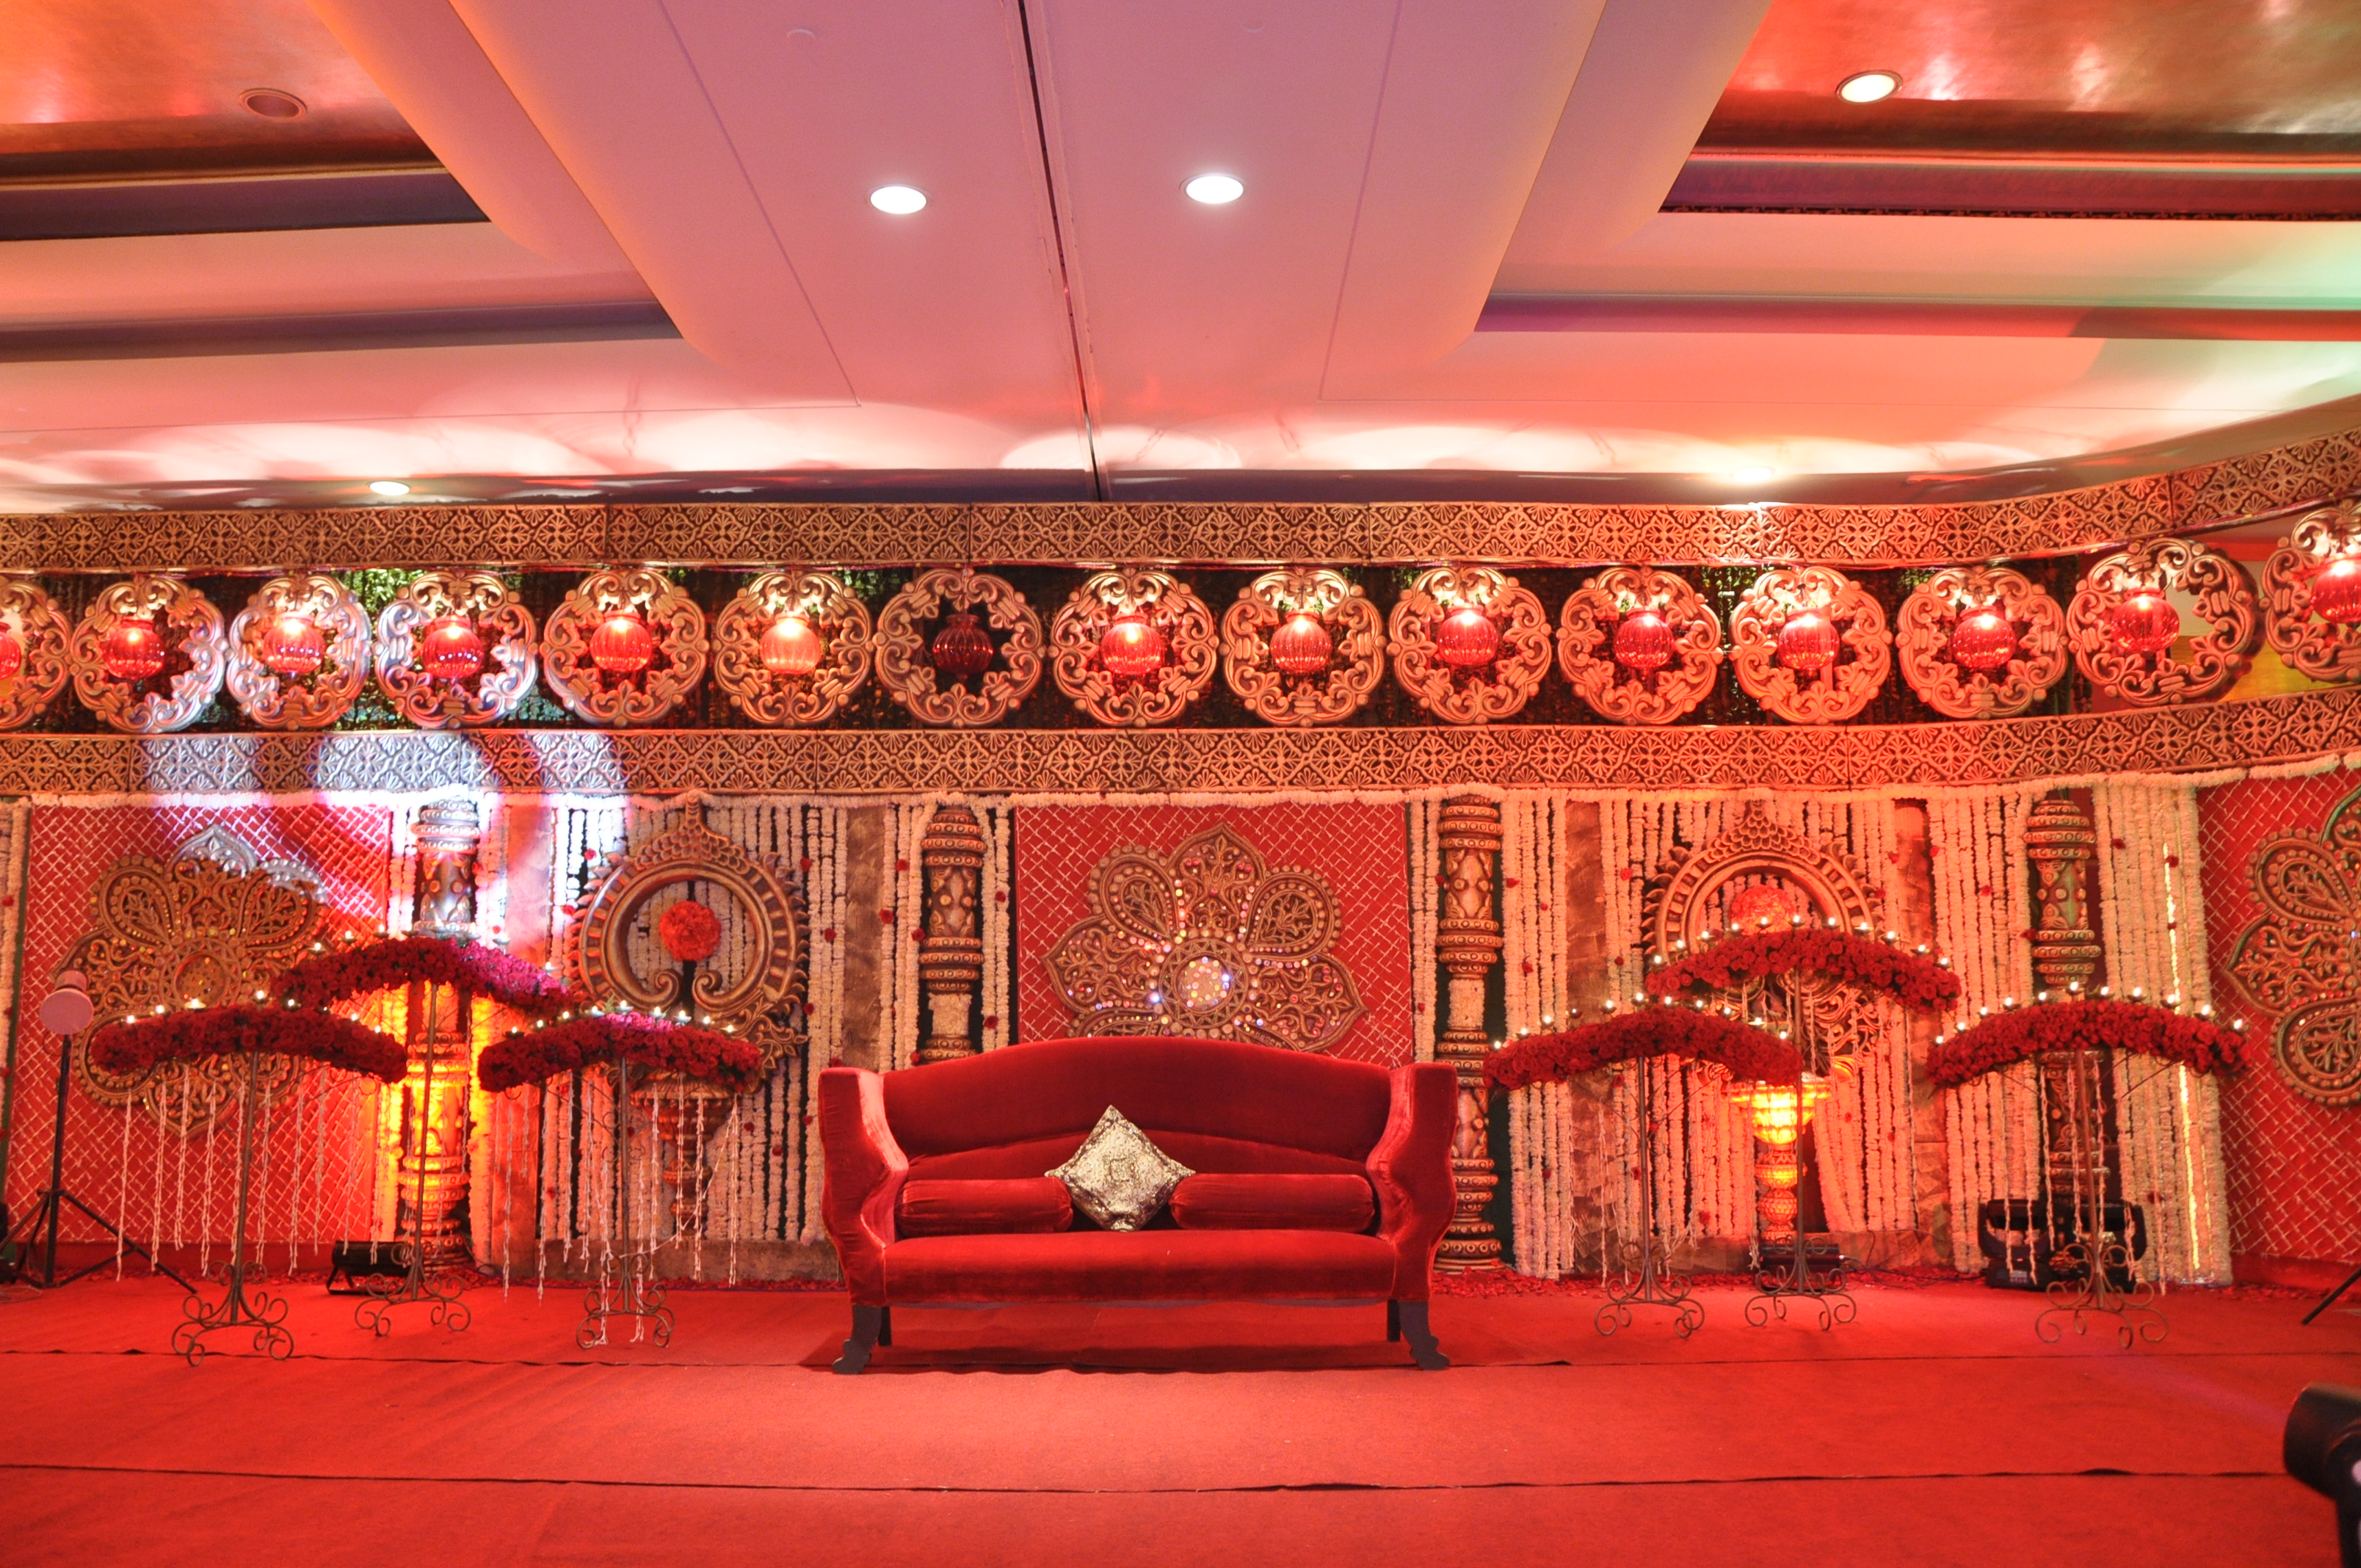  Wedding  Decorations  Royal  Wedding  Planners in India 